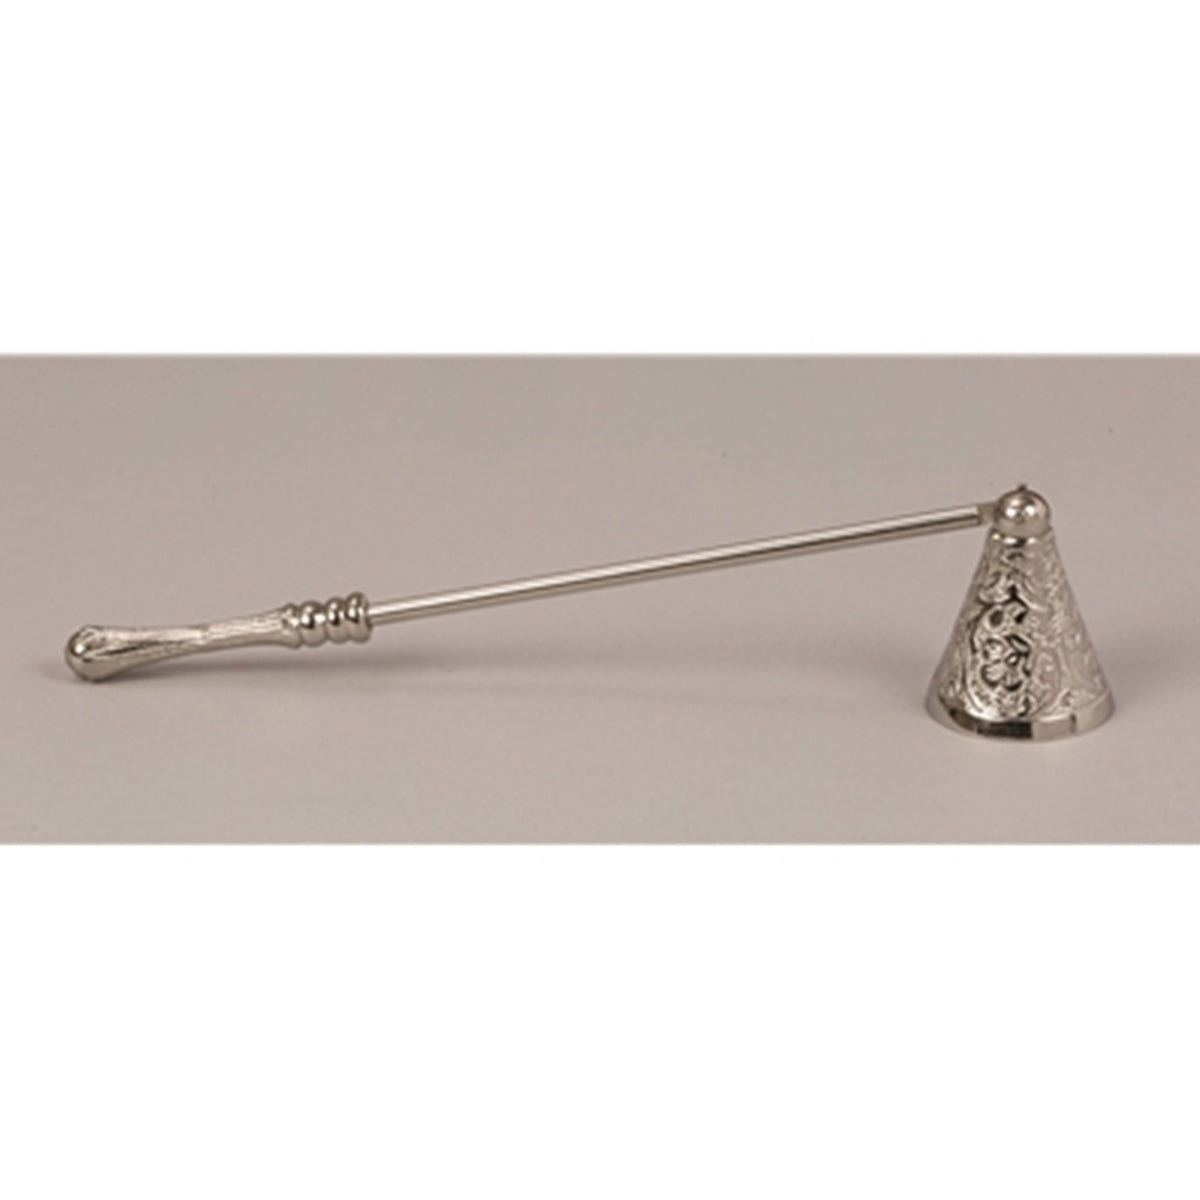 Ornate Nickel Candle Snuffer